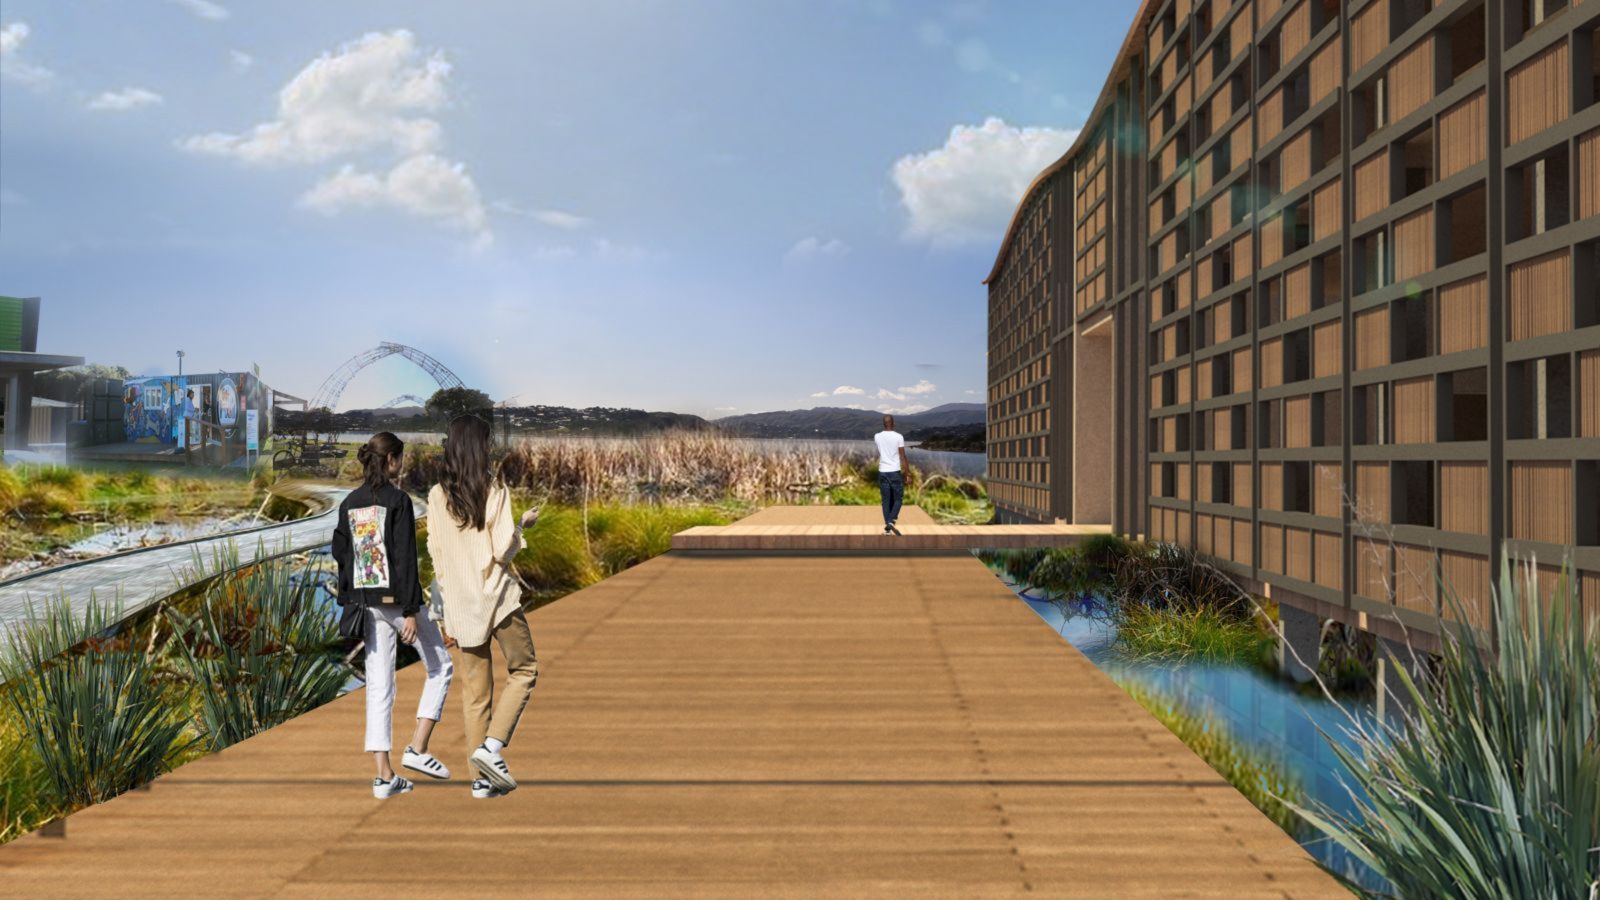 architectural render of people walking alond a boardwalk next to streams